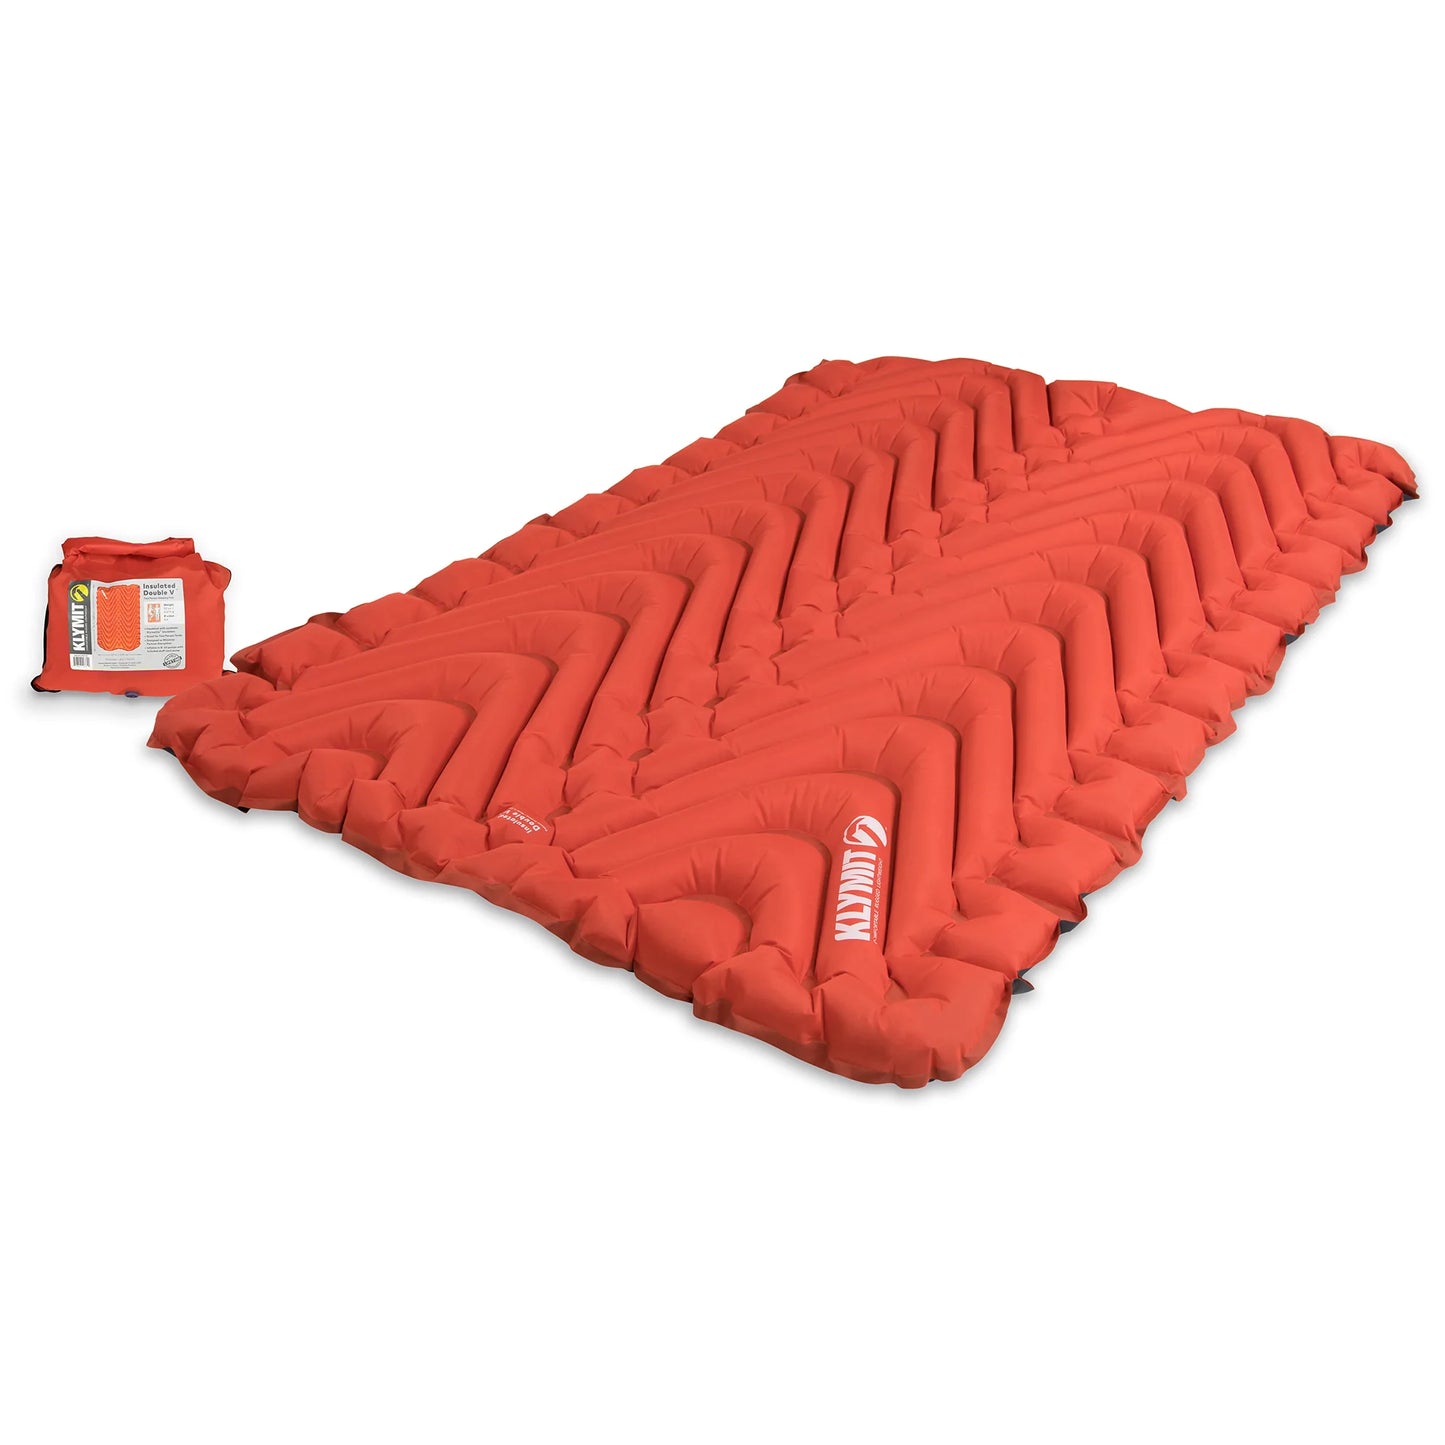 Klymit - Insulated Double V Sleeping Pad